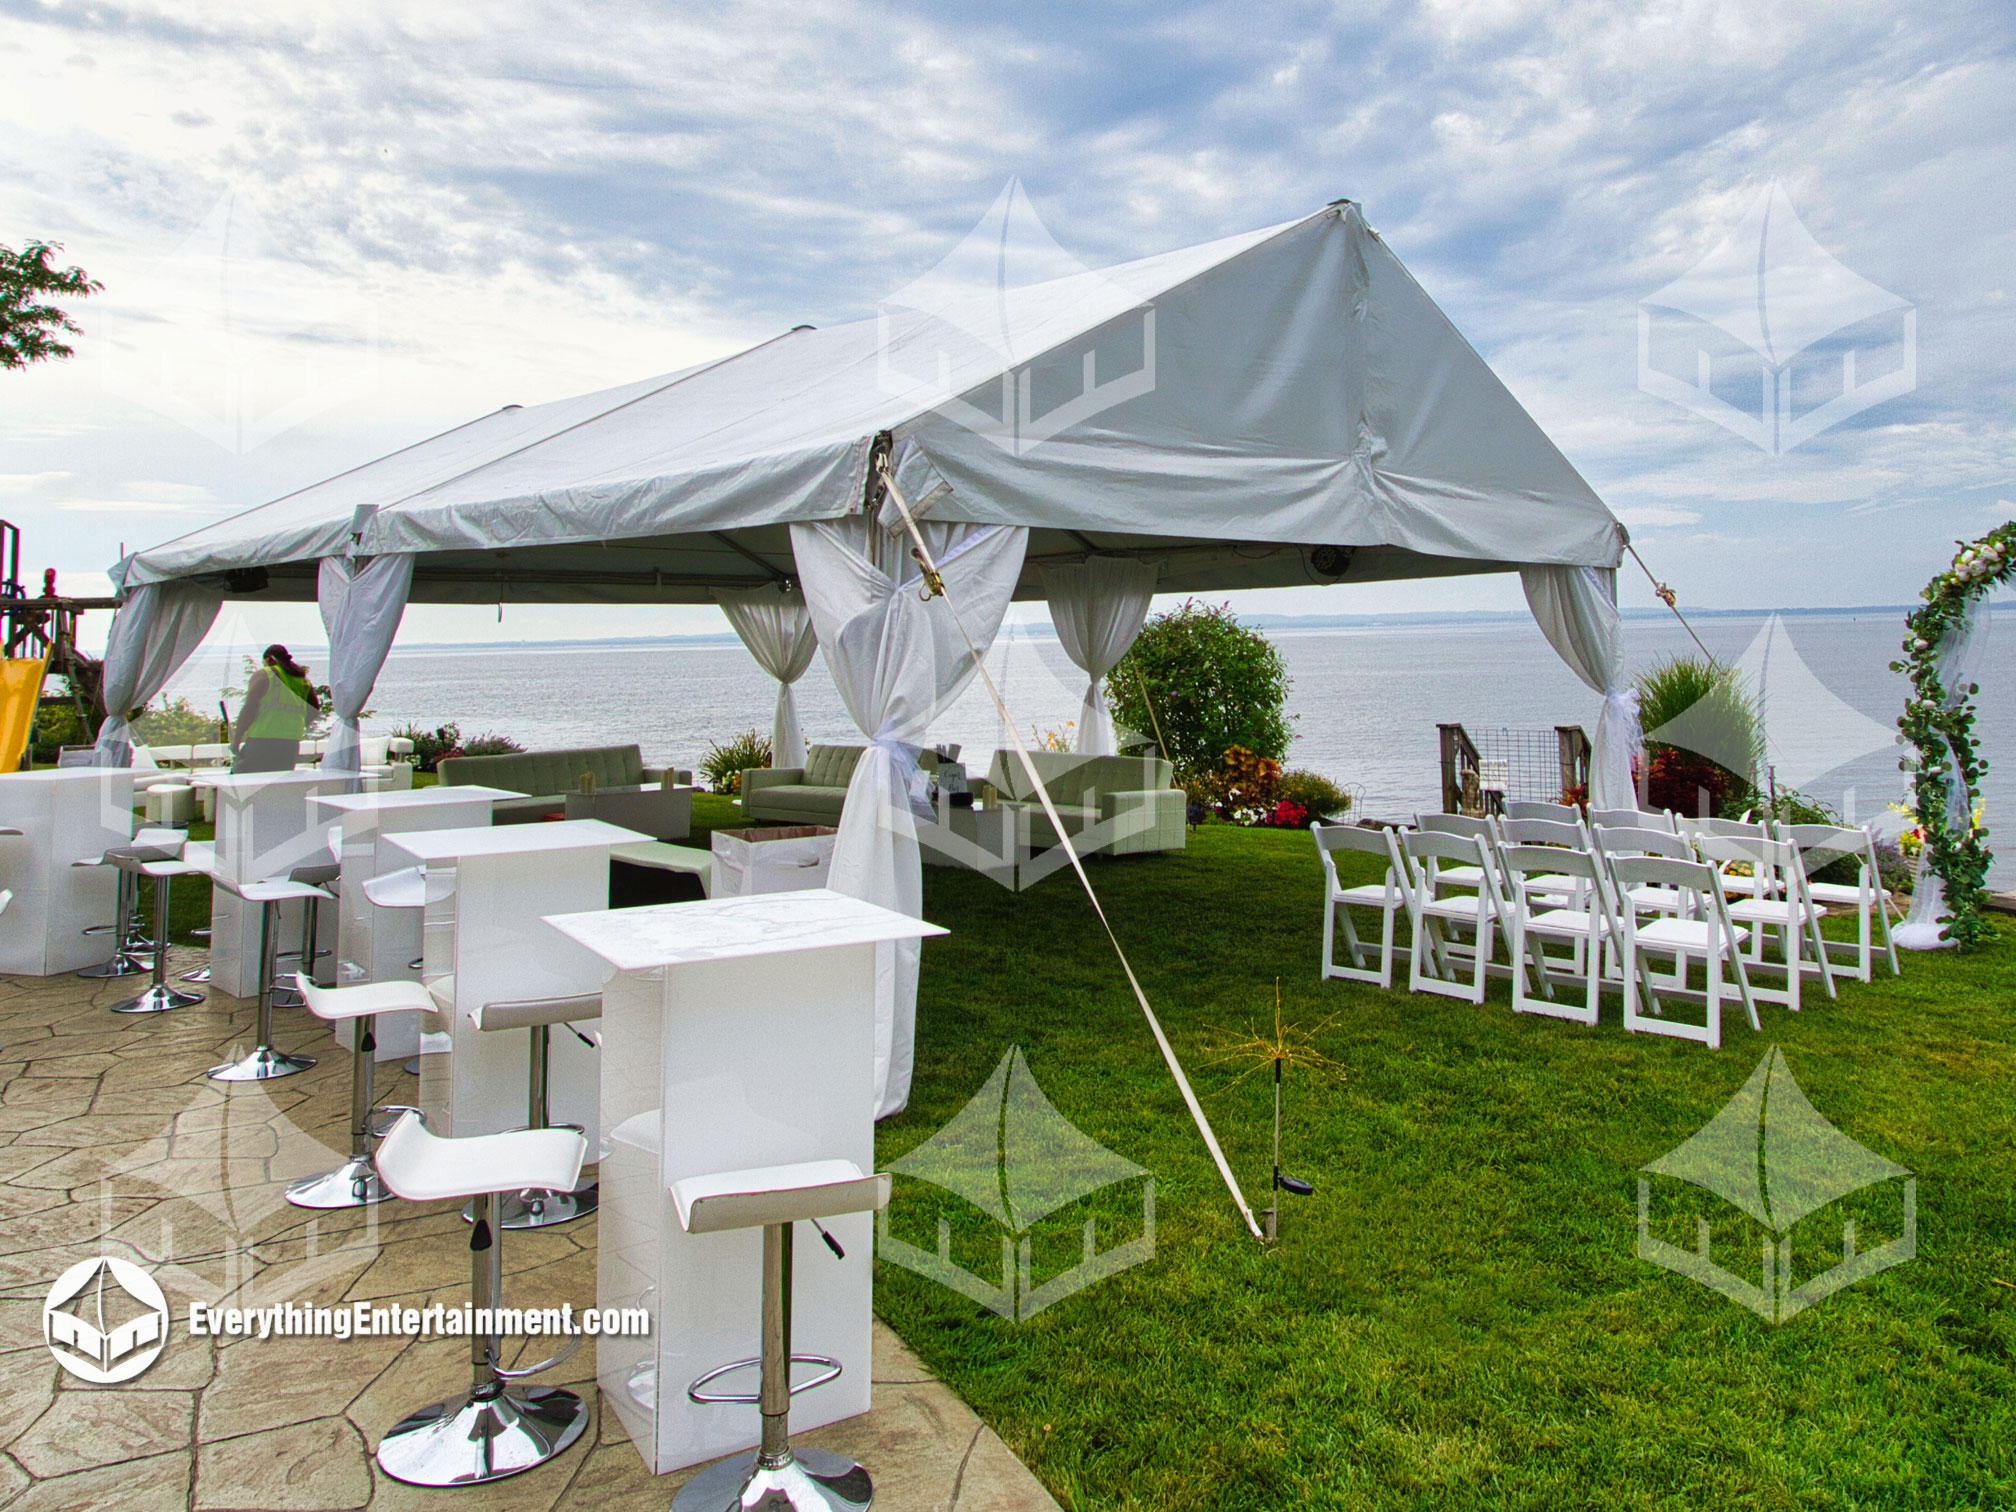 20x30 foot frame tent with leg drapes, overlooking the ocean